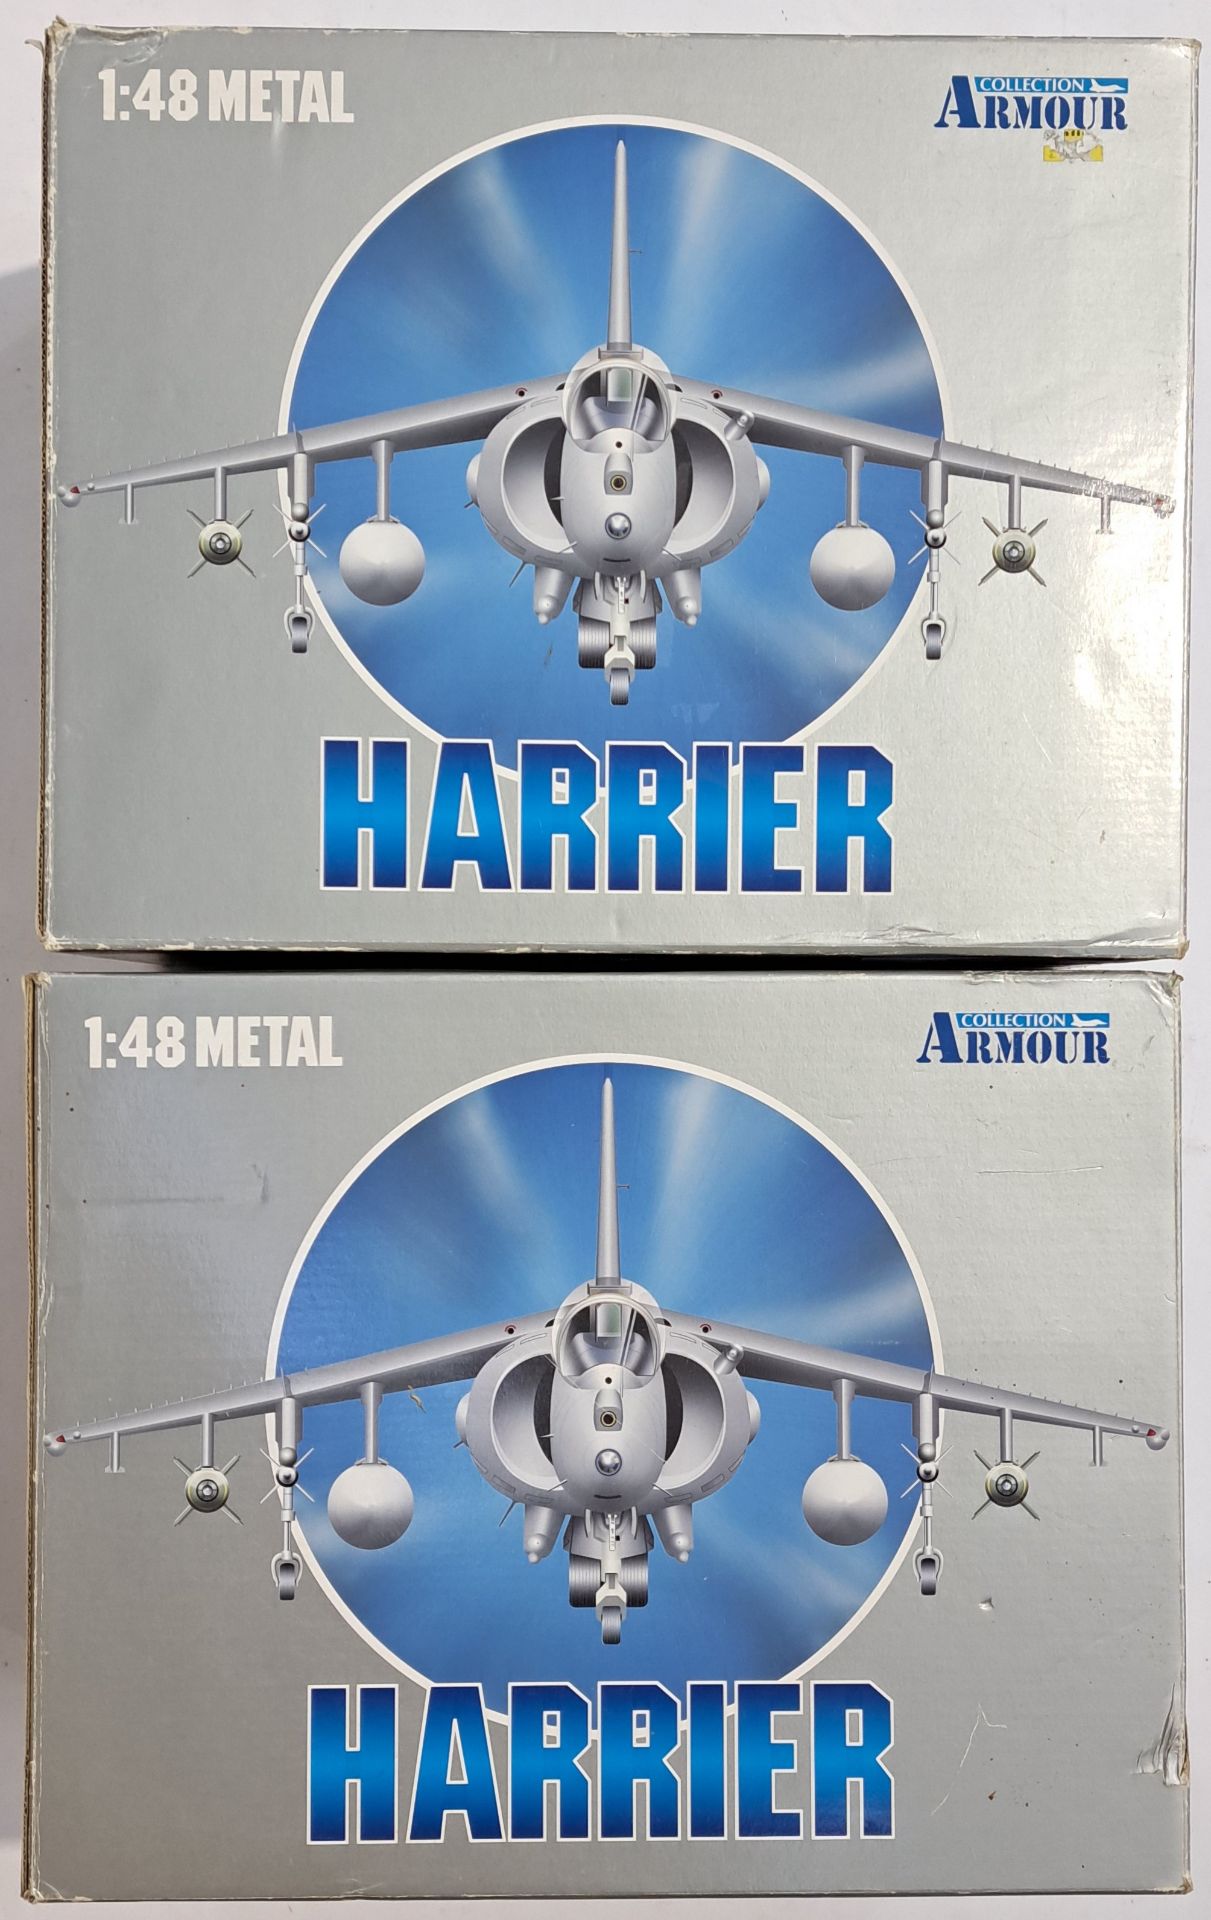 Franklin Mint "Armour Collection", a boxed pair of 1:48 scale military aircraft